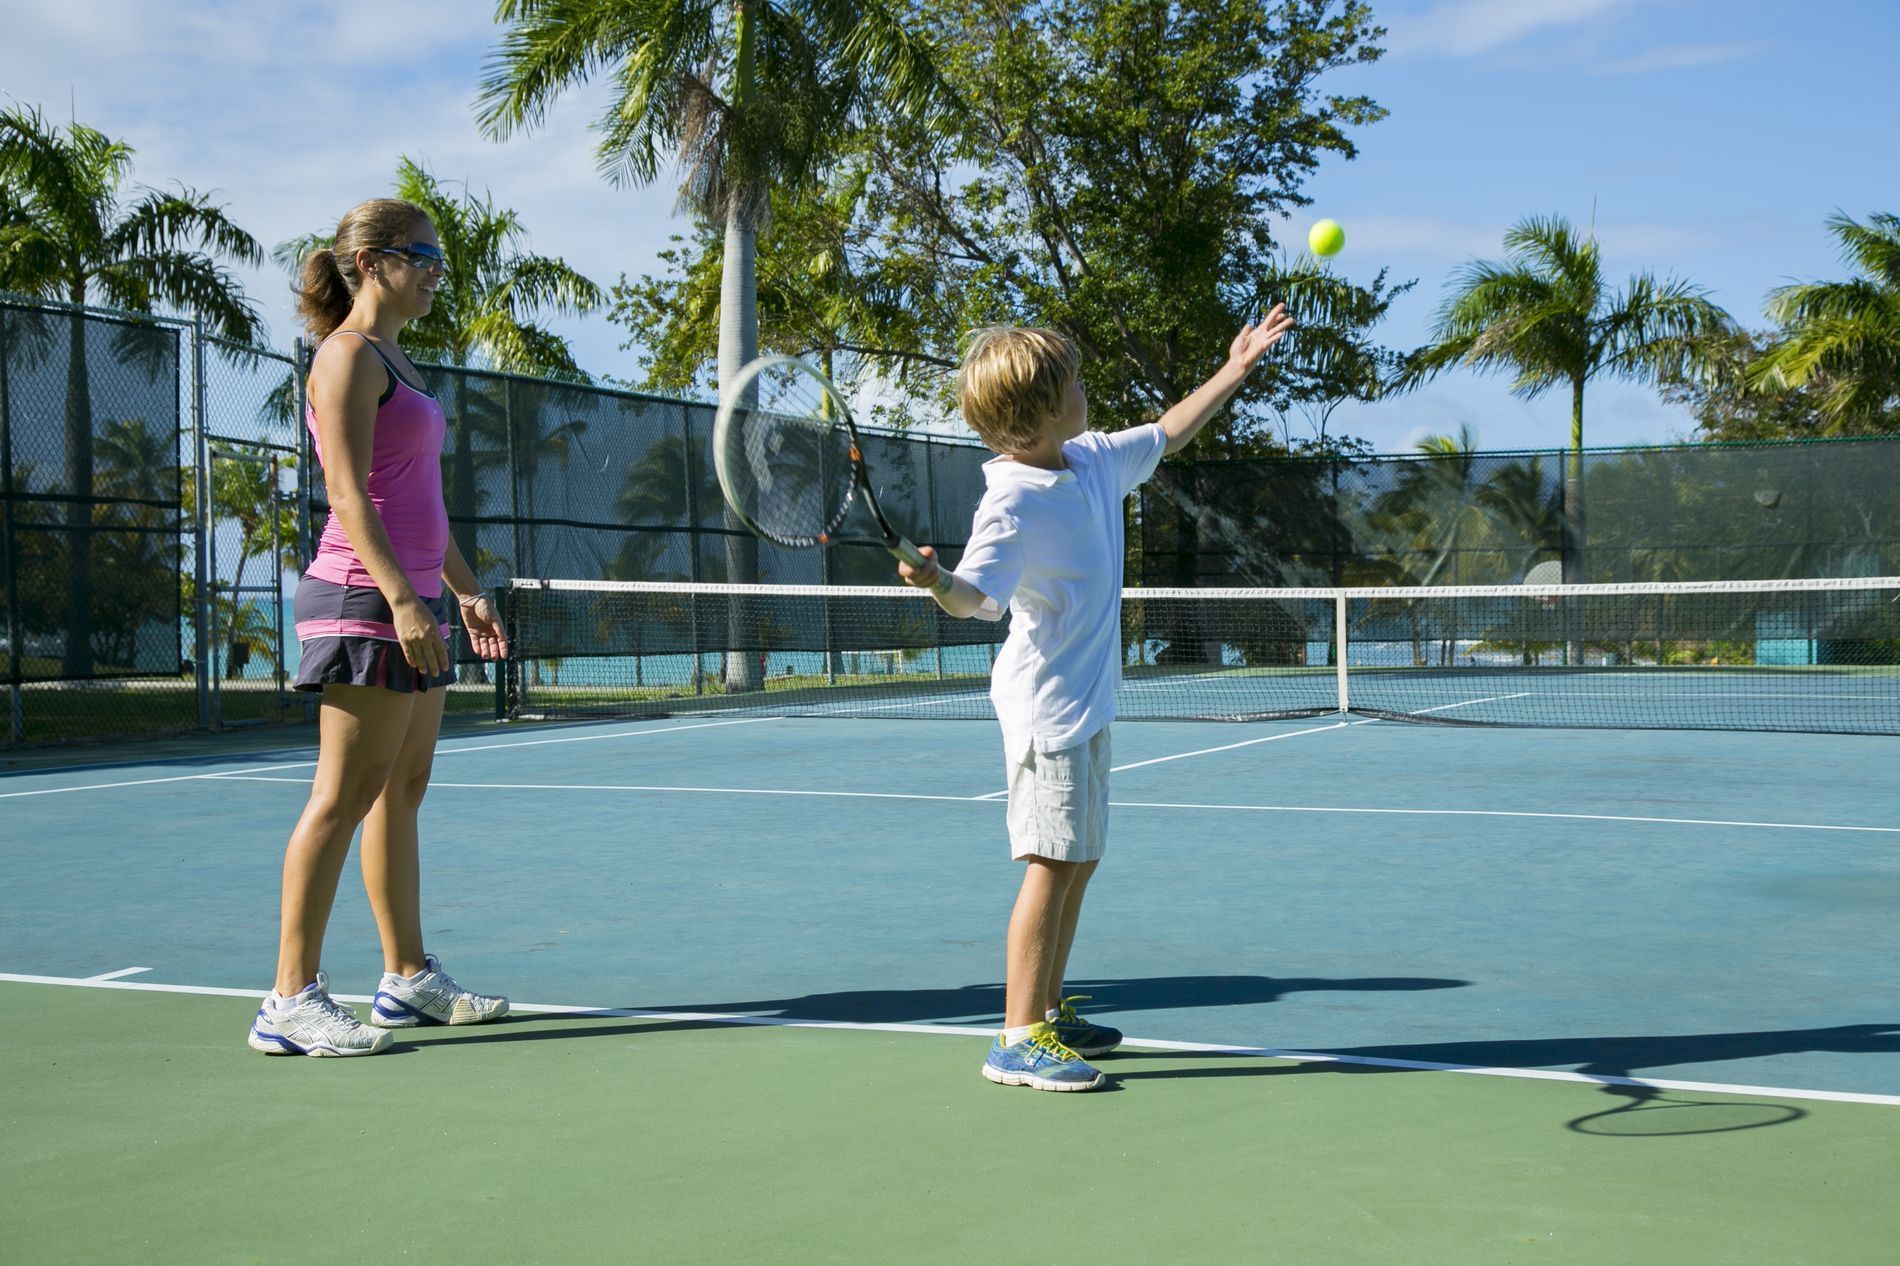 Mother & son playing tennis in the court at The Buccaneer Resort St. Croix